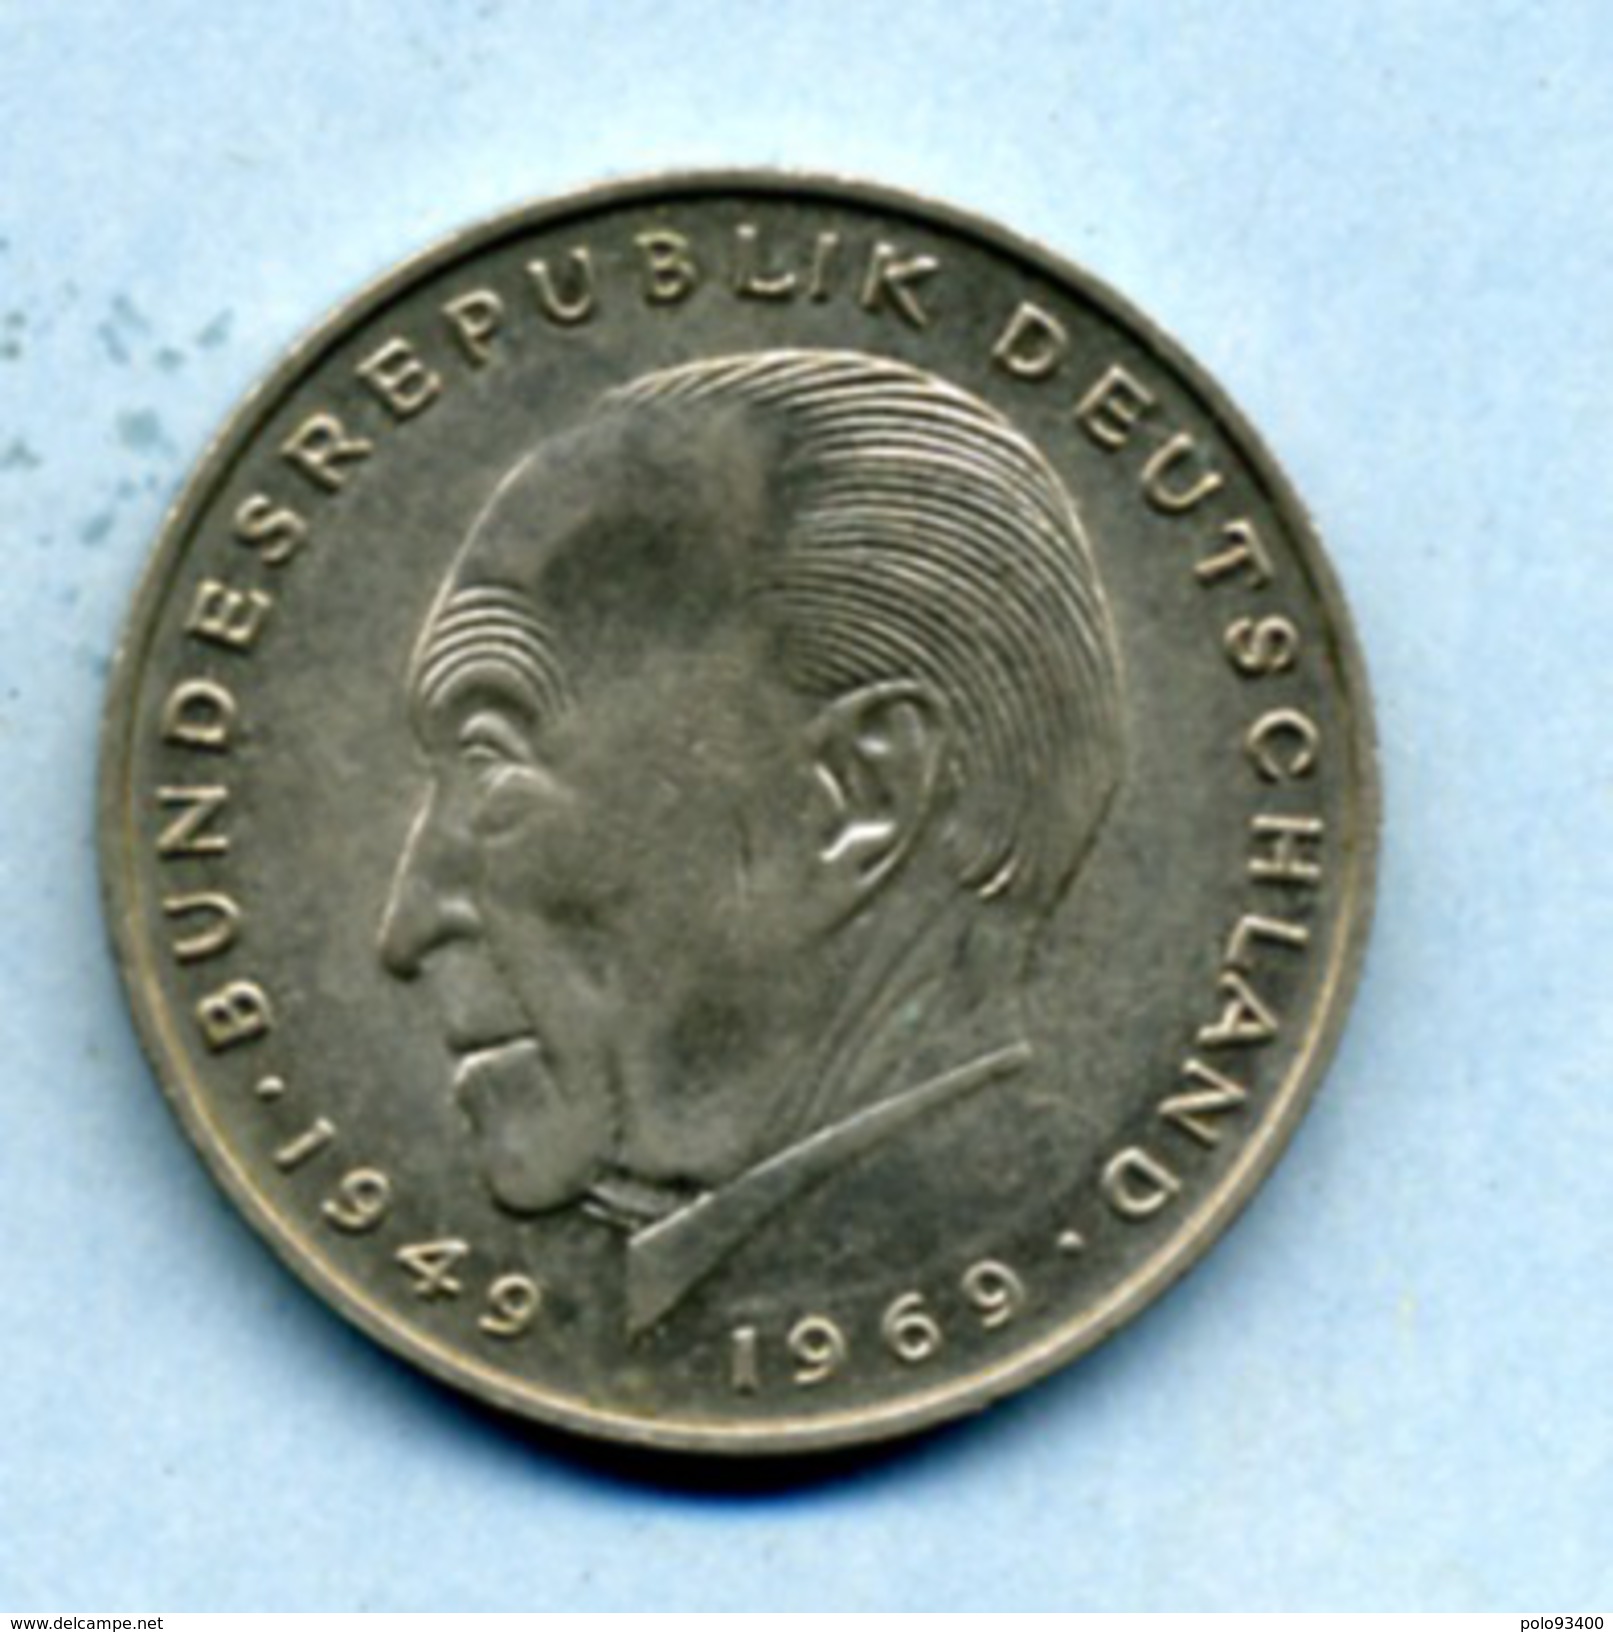 1968 D 2 MARKS - 2 Marcos